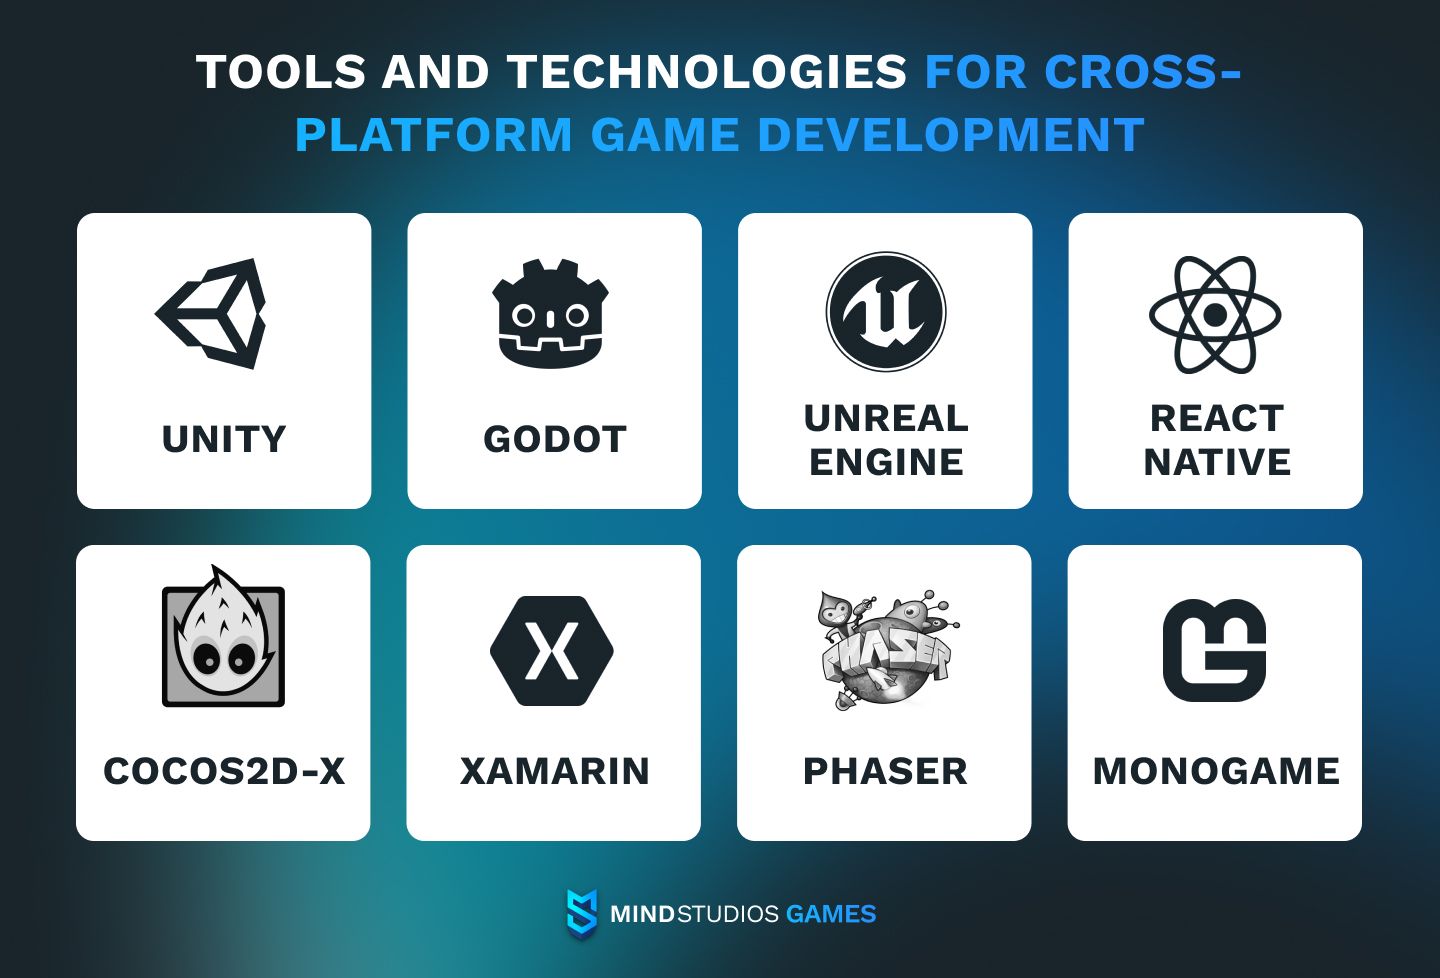 Tools and technologies for cross-platform game development